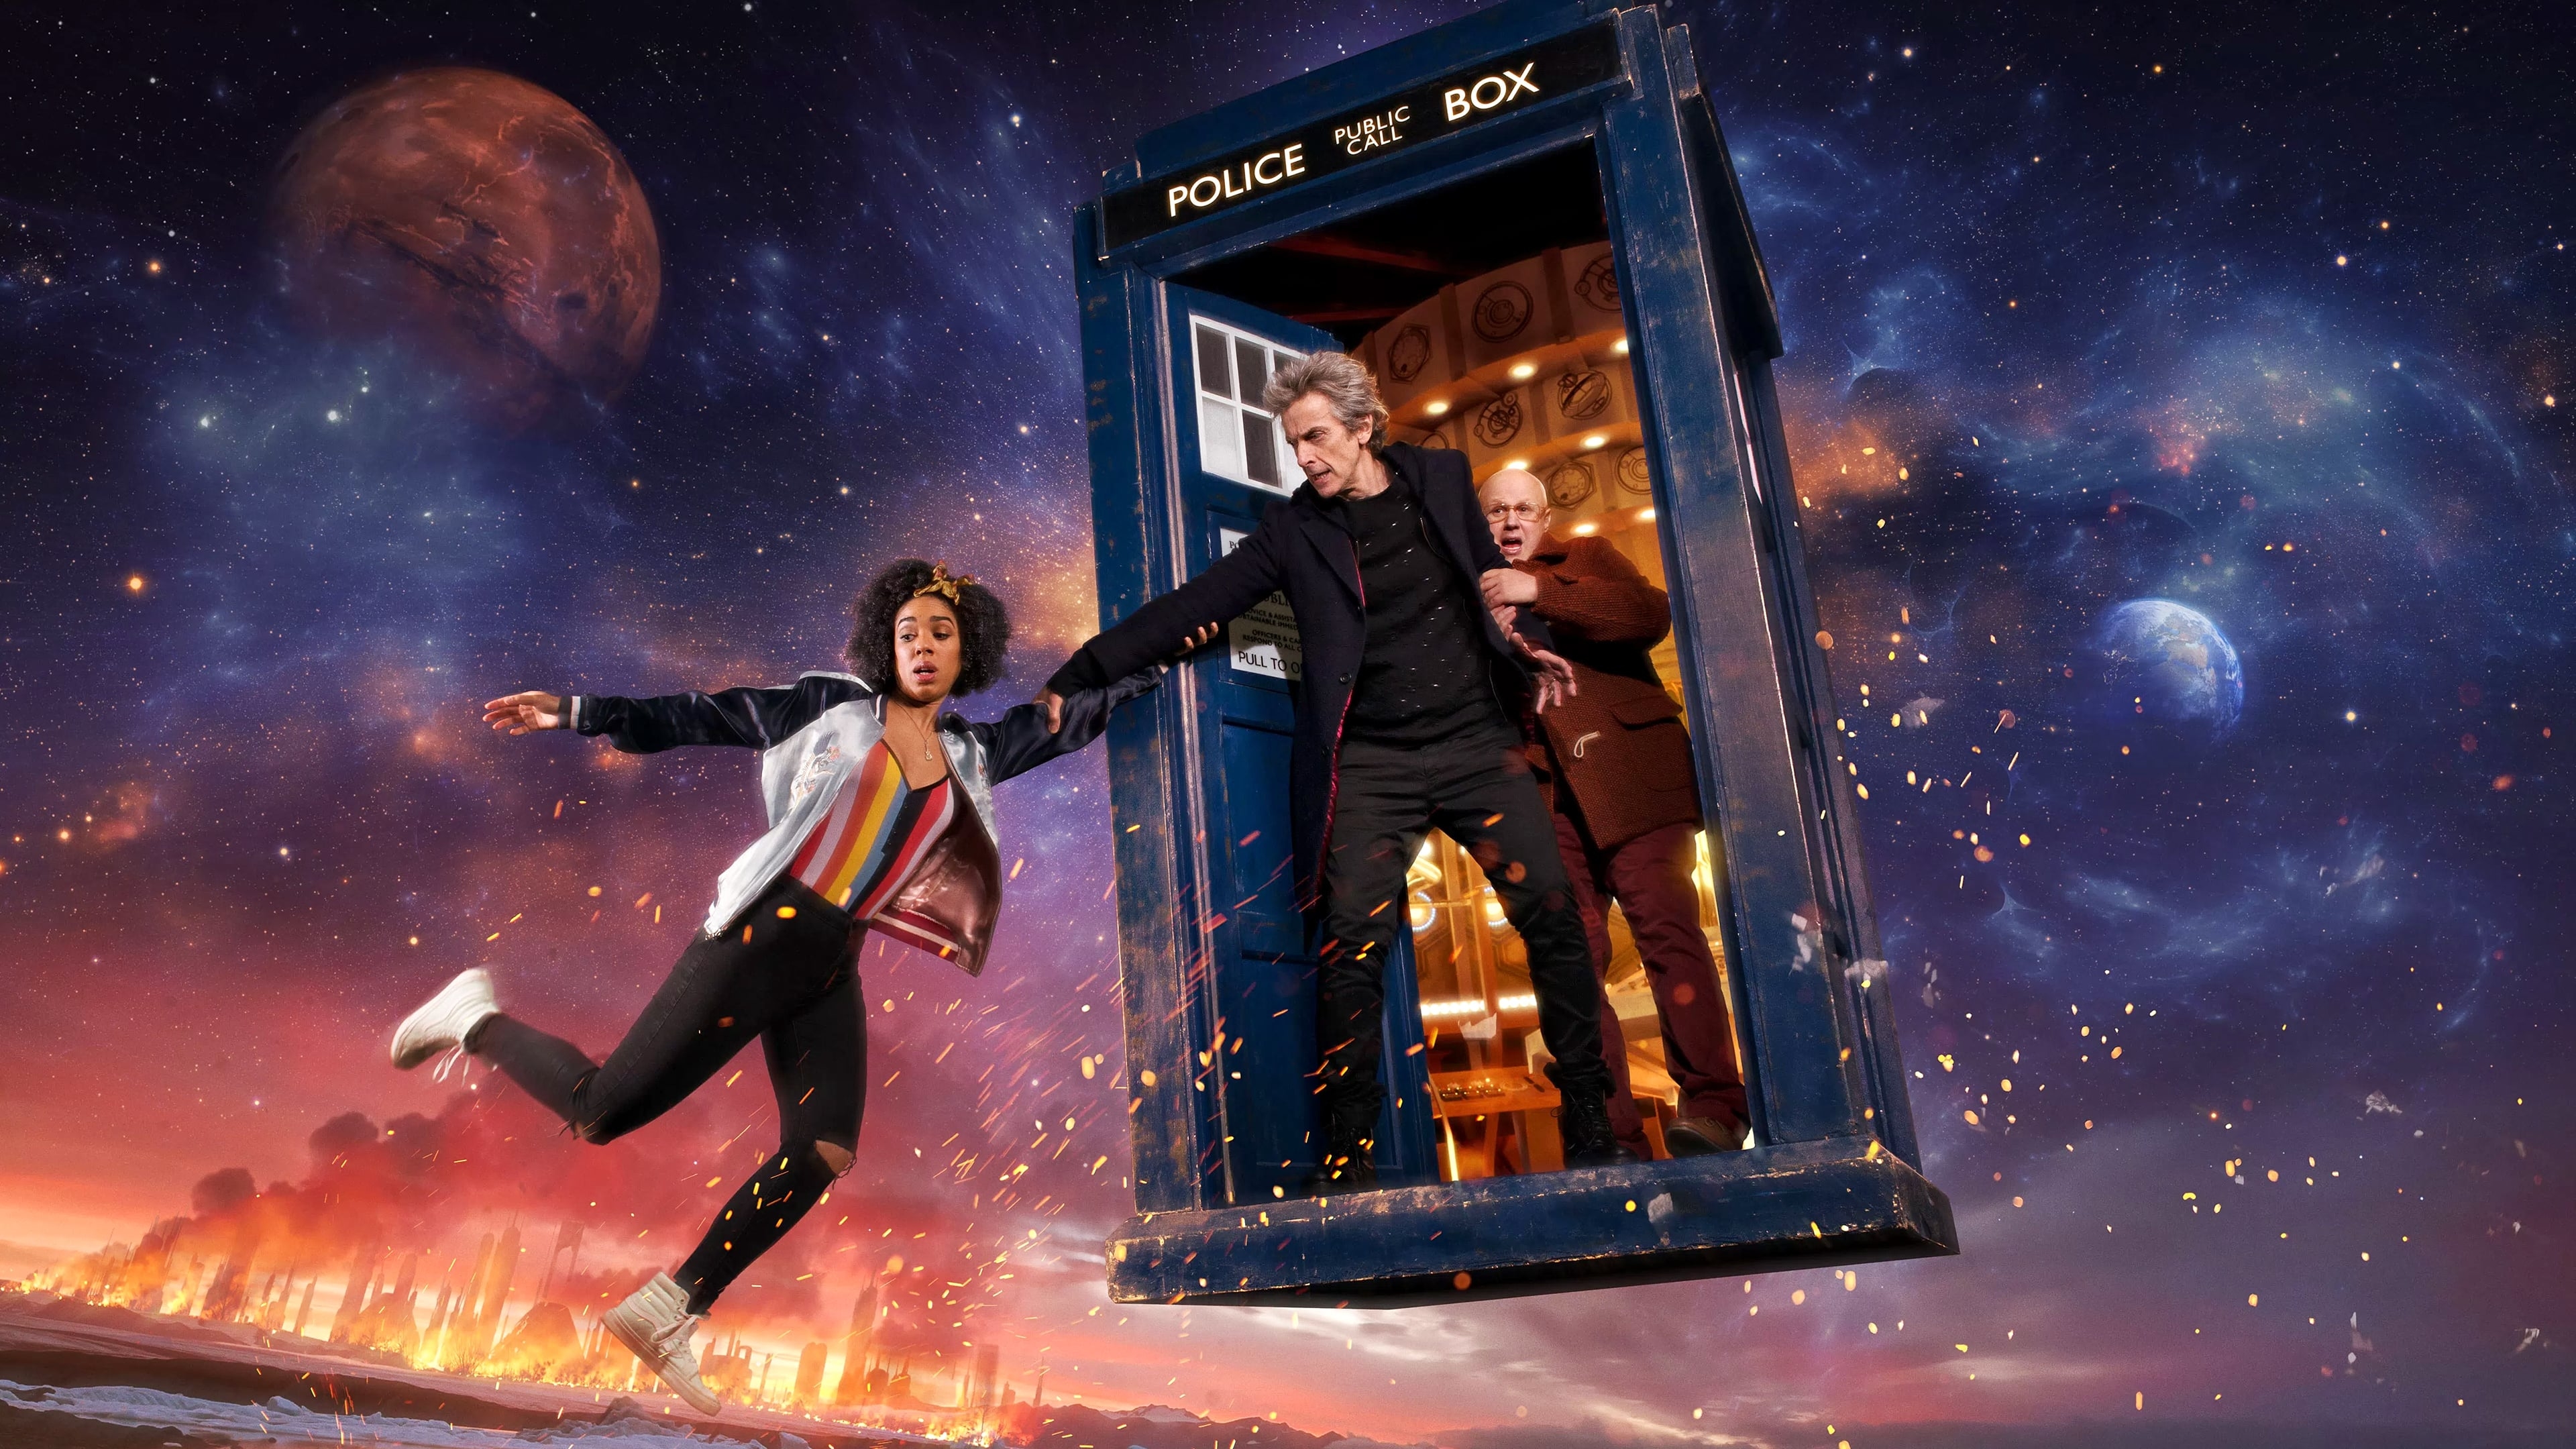 Doctor Who iPhone 5 Wallpaper  Imgur  Doctor who wallpaper Doctor who  Tardis